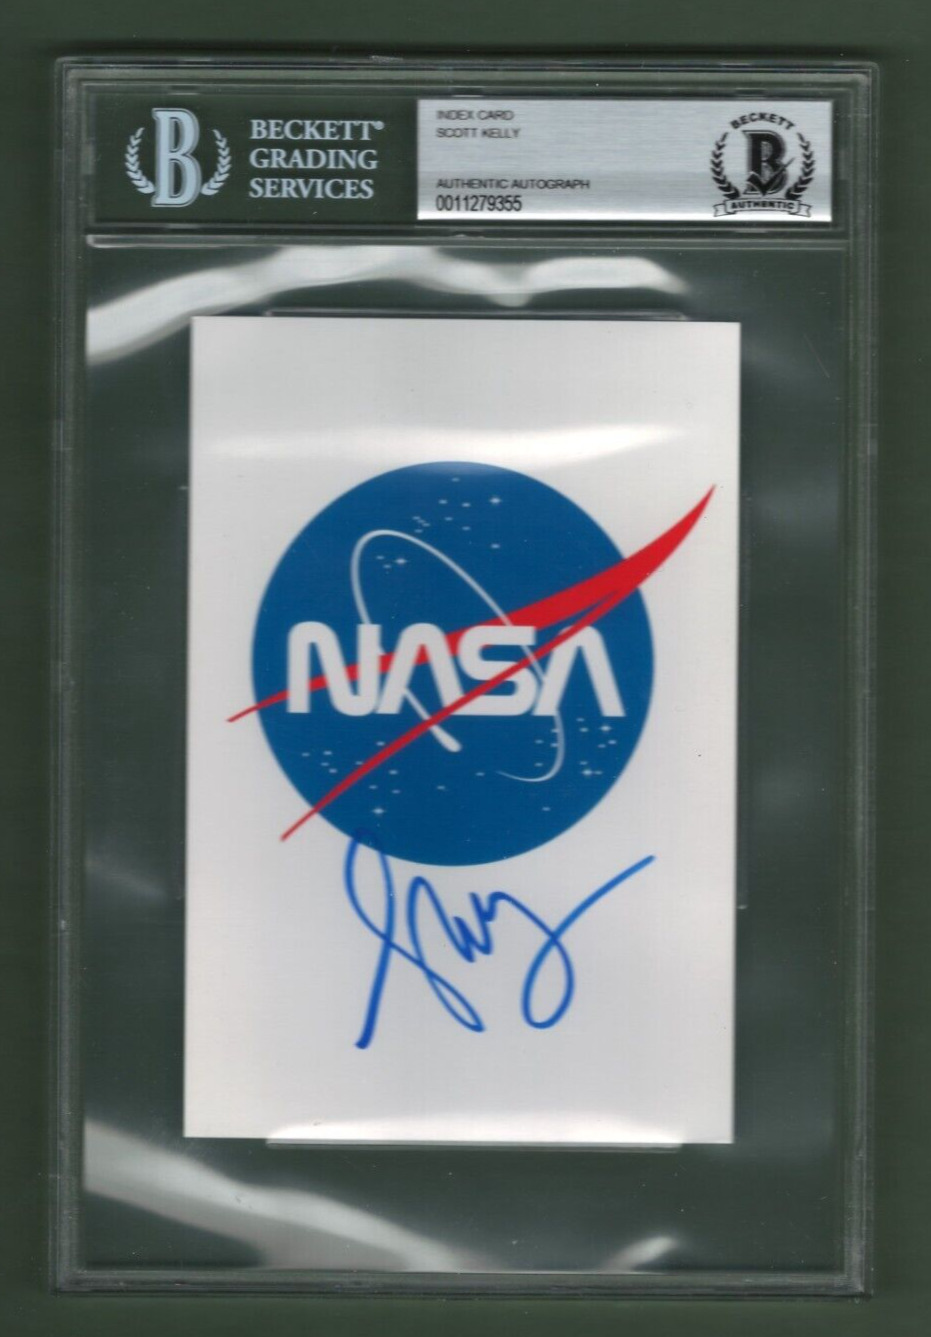 Scott Kelly Authentic Autographed Signed NASA 4x6 Postcard Beckett BAS Certified